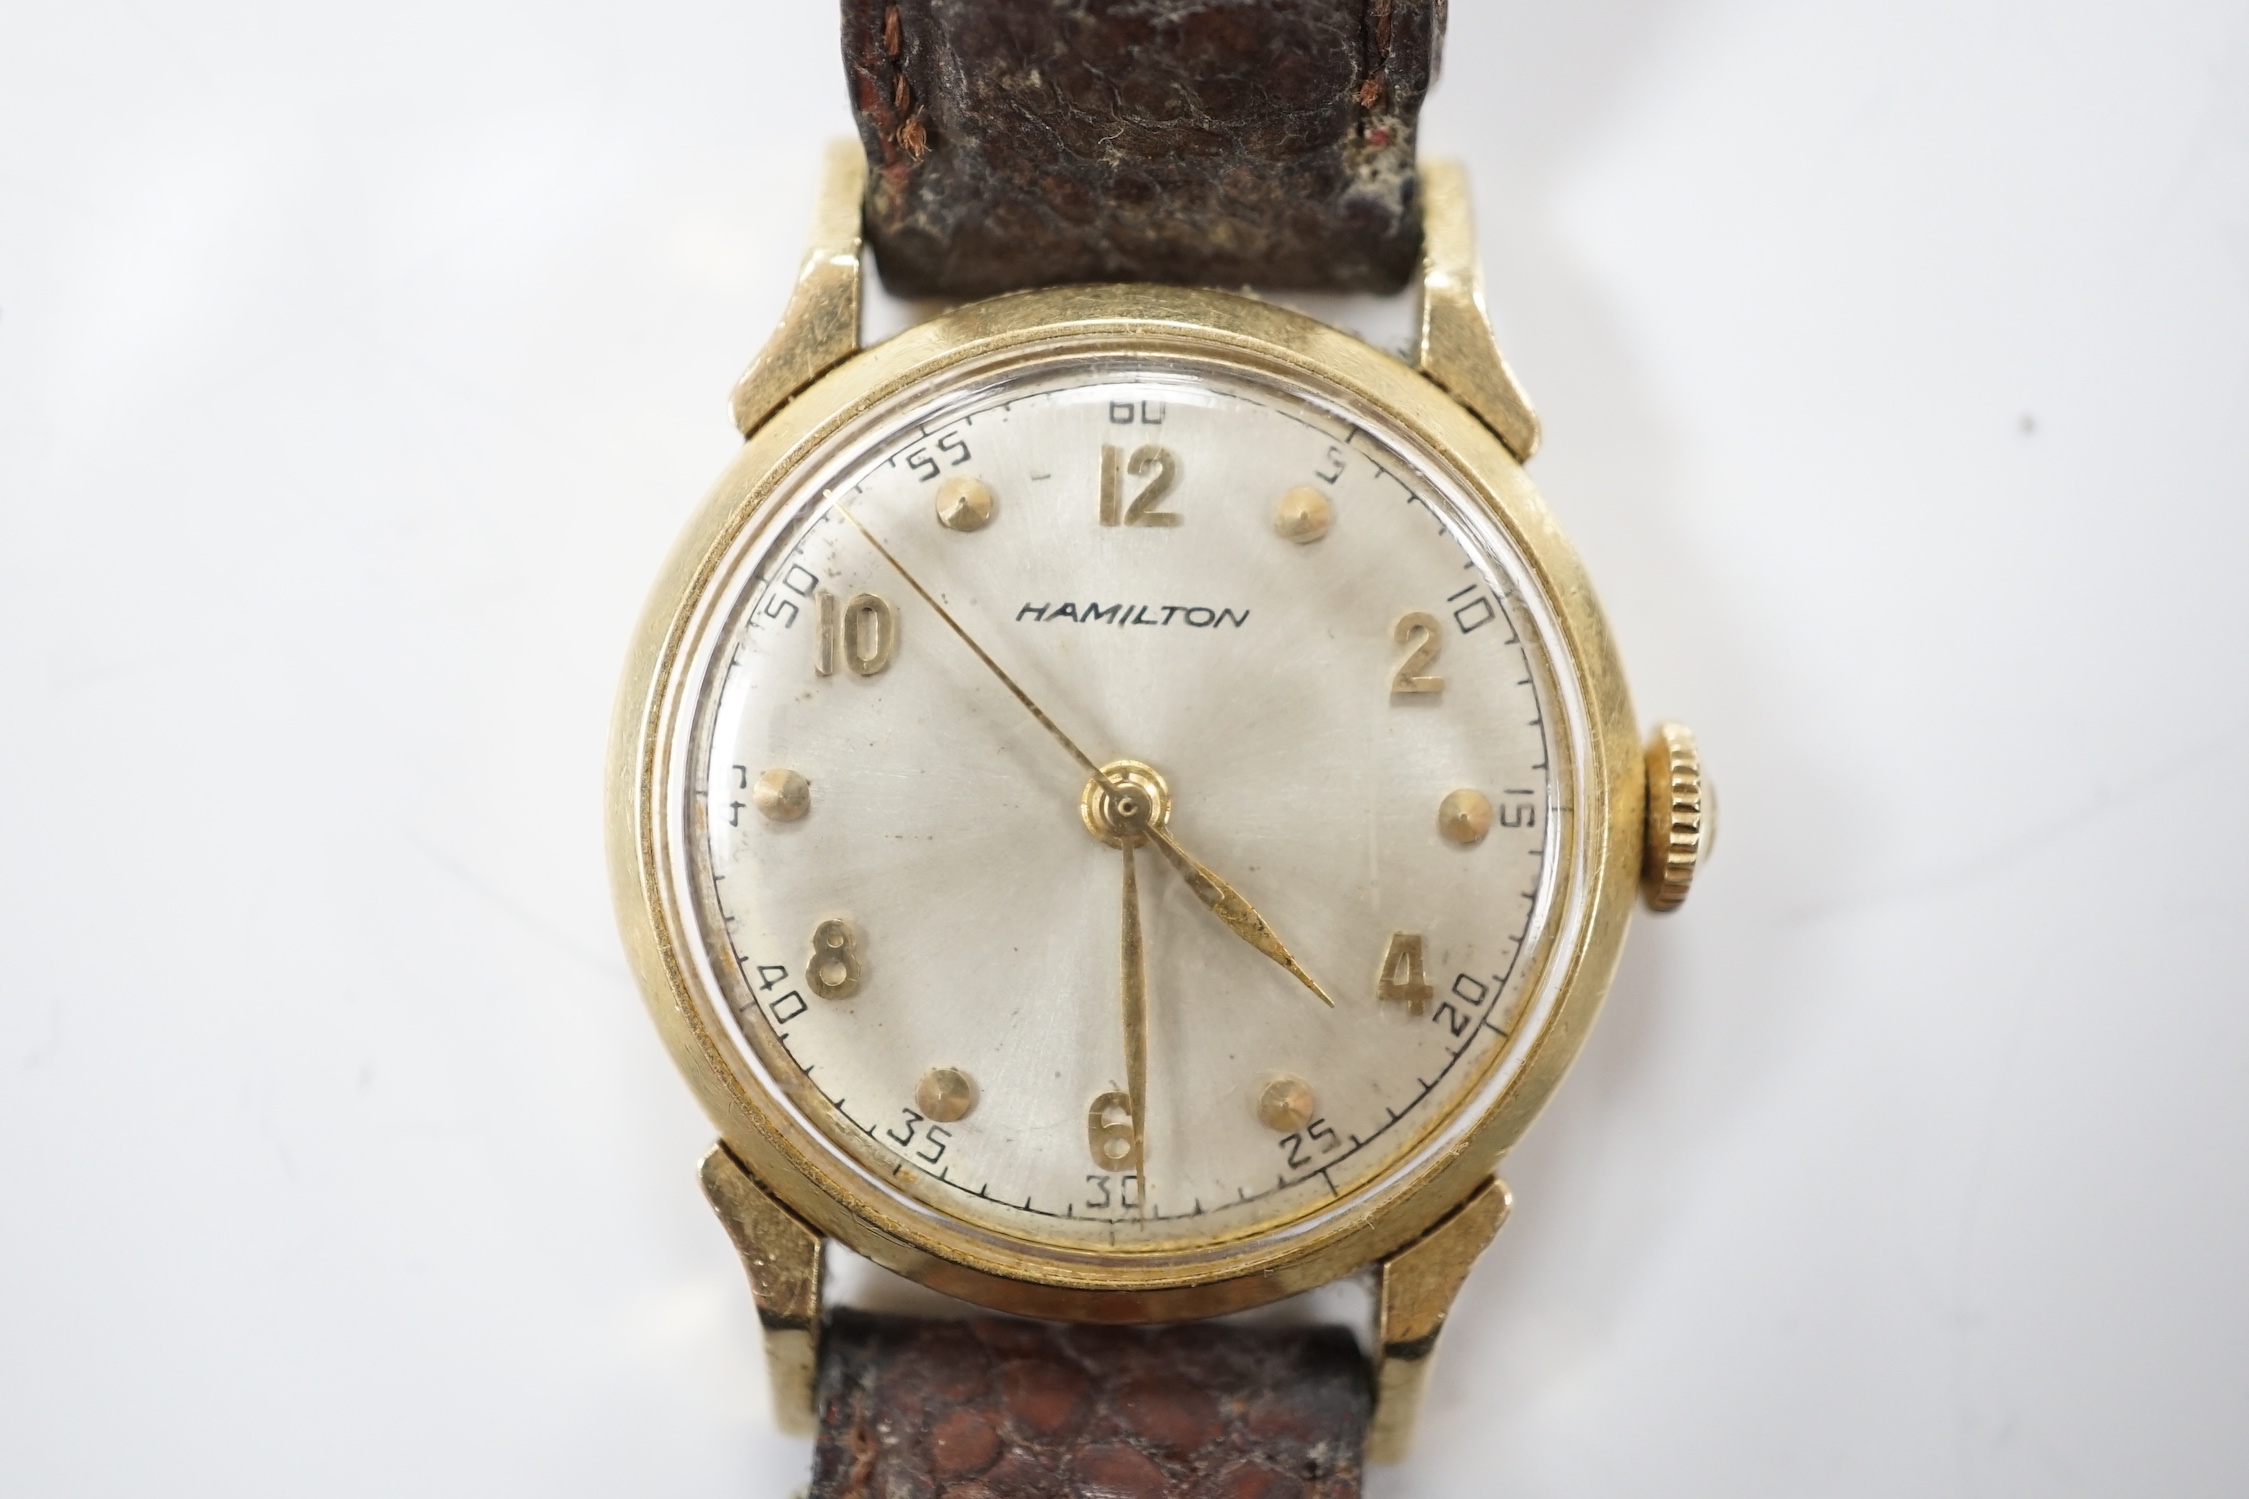 A gentleman's 14k Hamilton manual wind wrist watch, with Arabic dial, on associated leather strap.